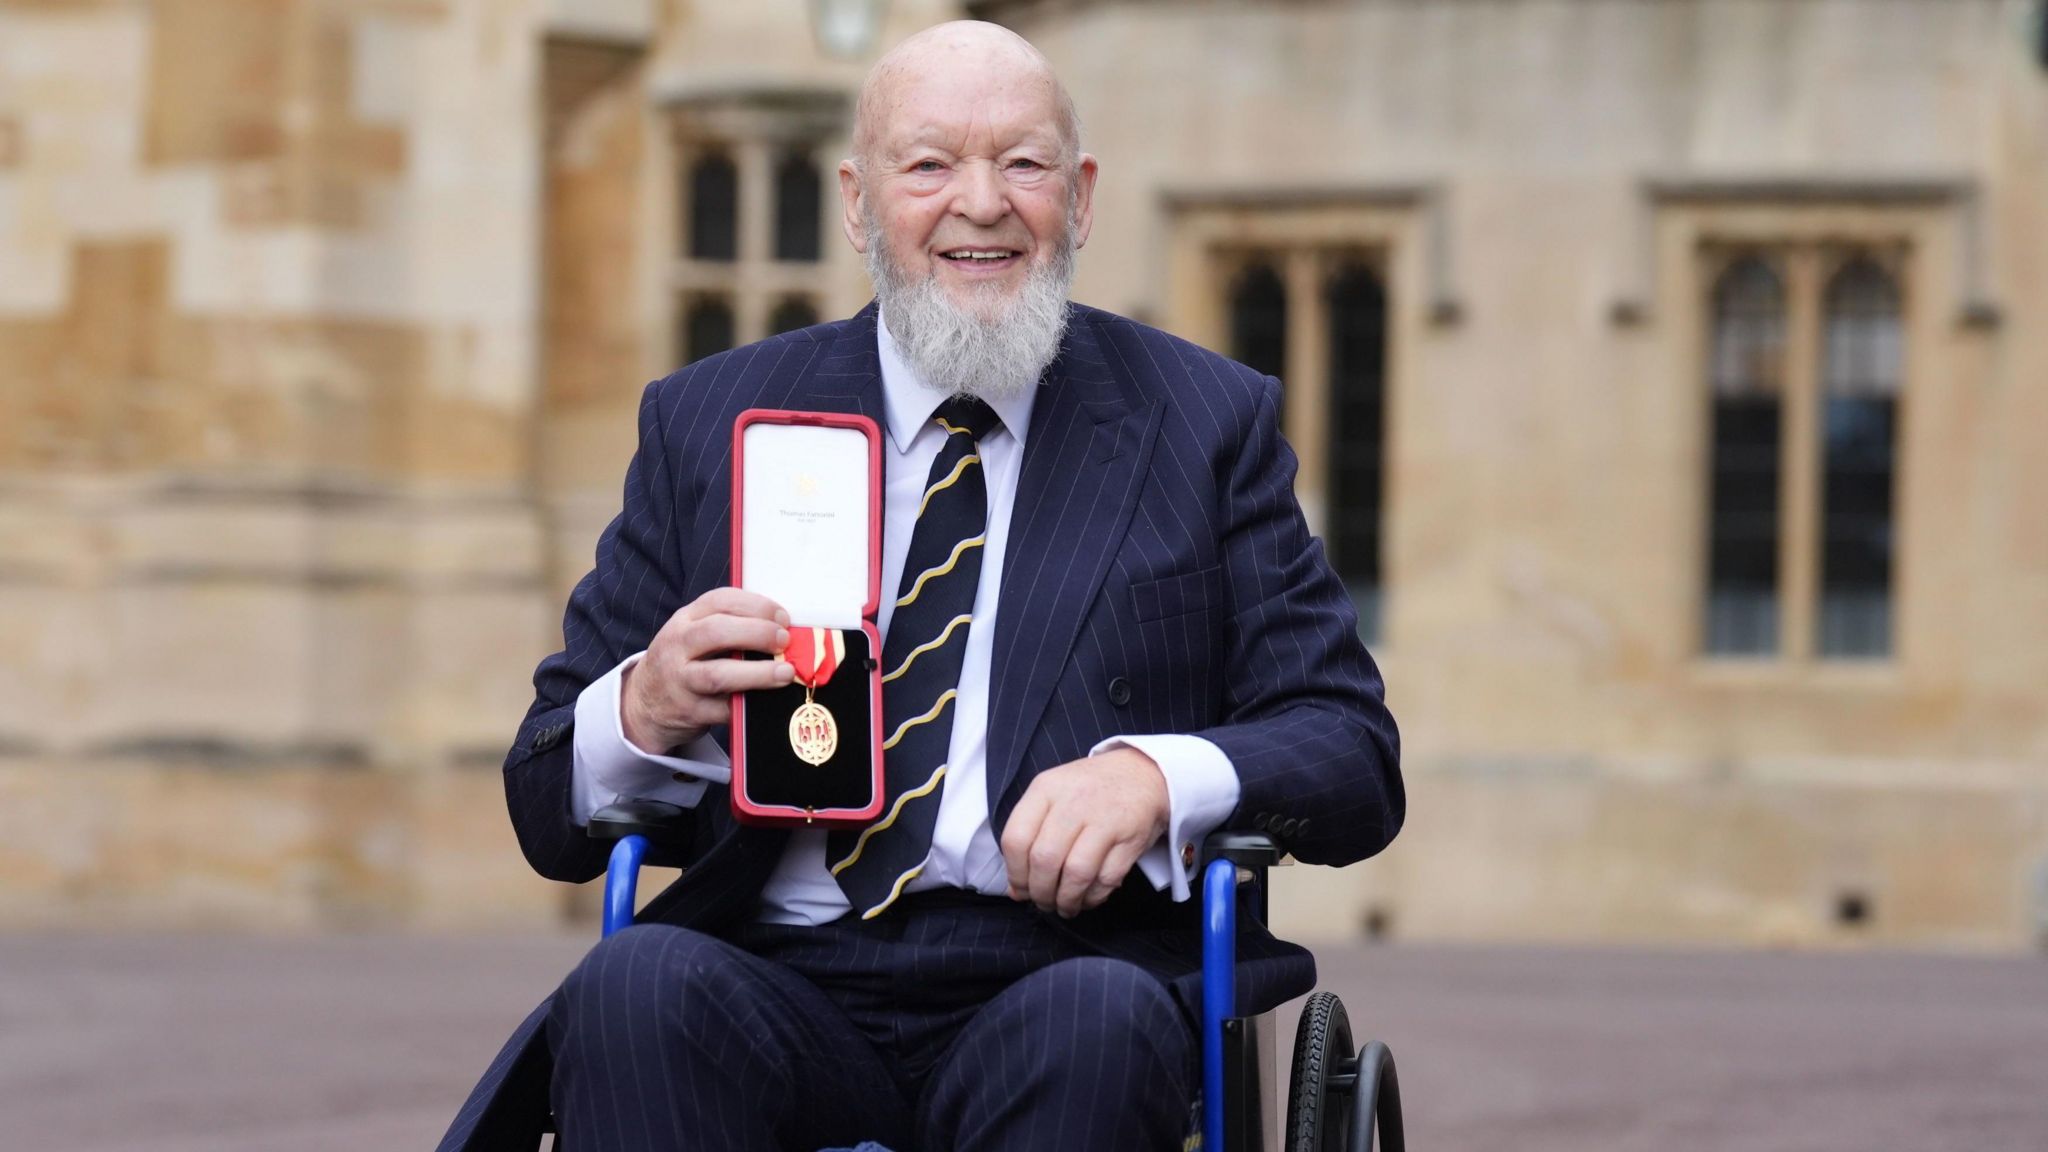 Michael Eavis with the medal awarded to him for his knighthood